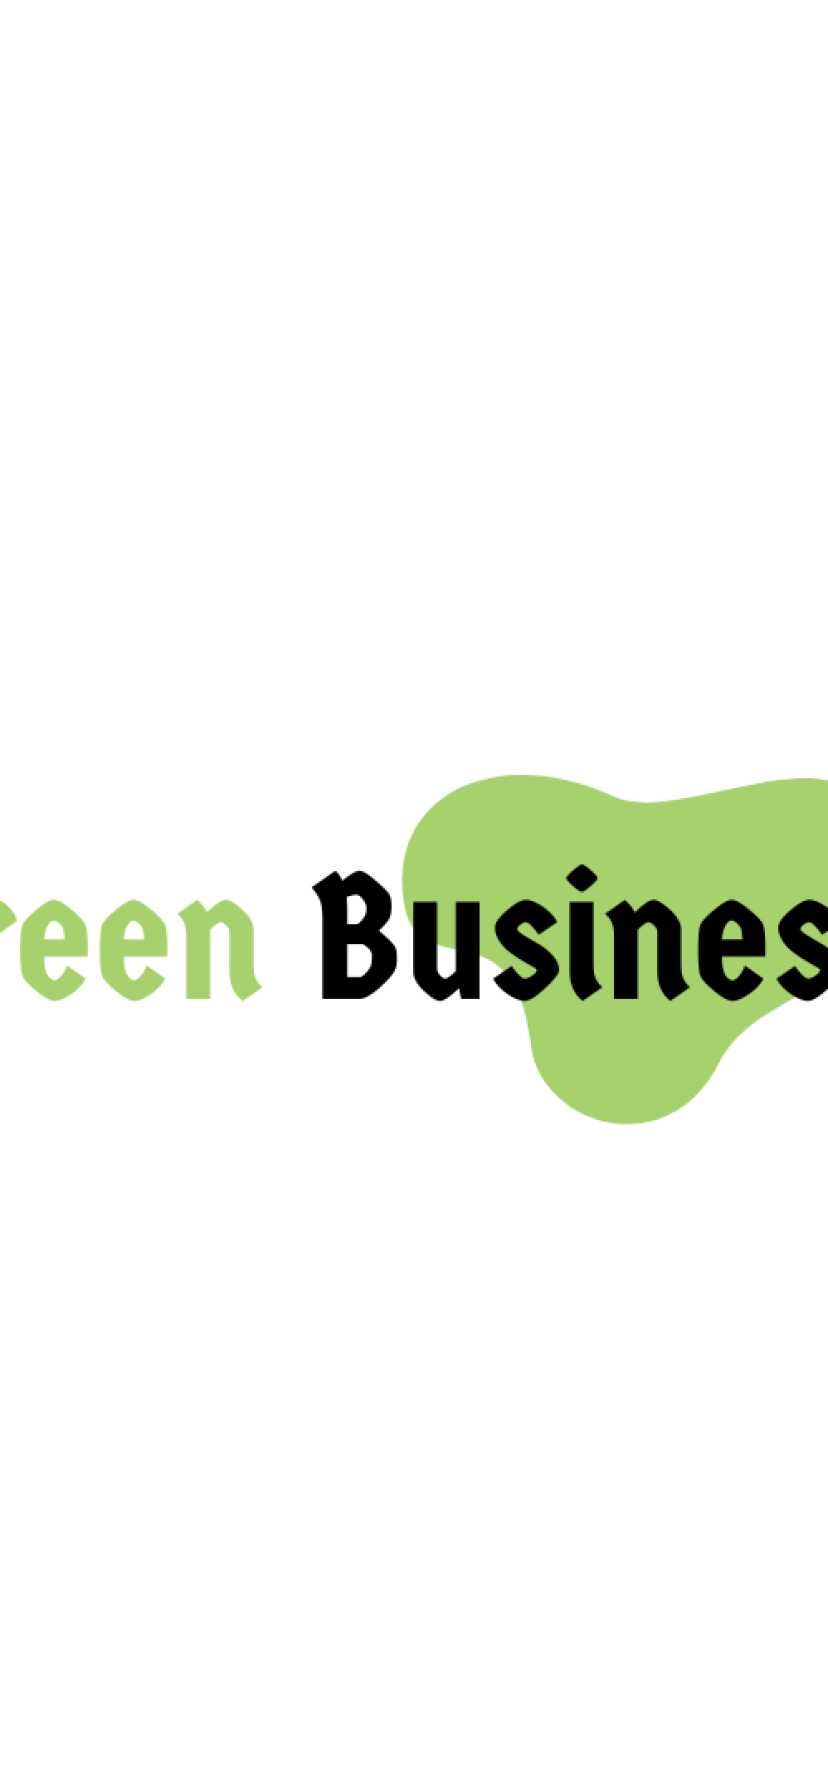 GreenBusiness.net Domain Name is For Sale